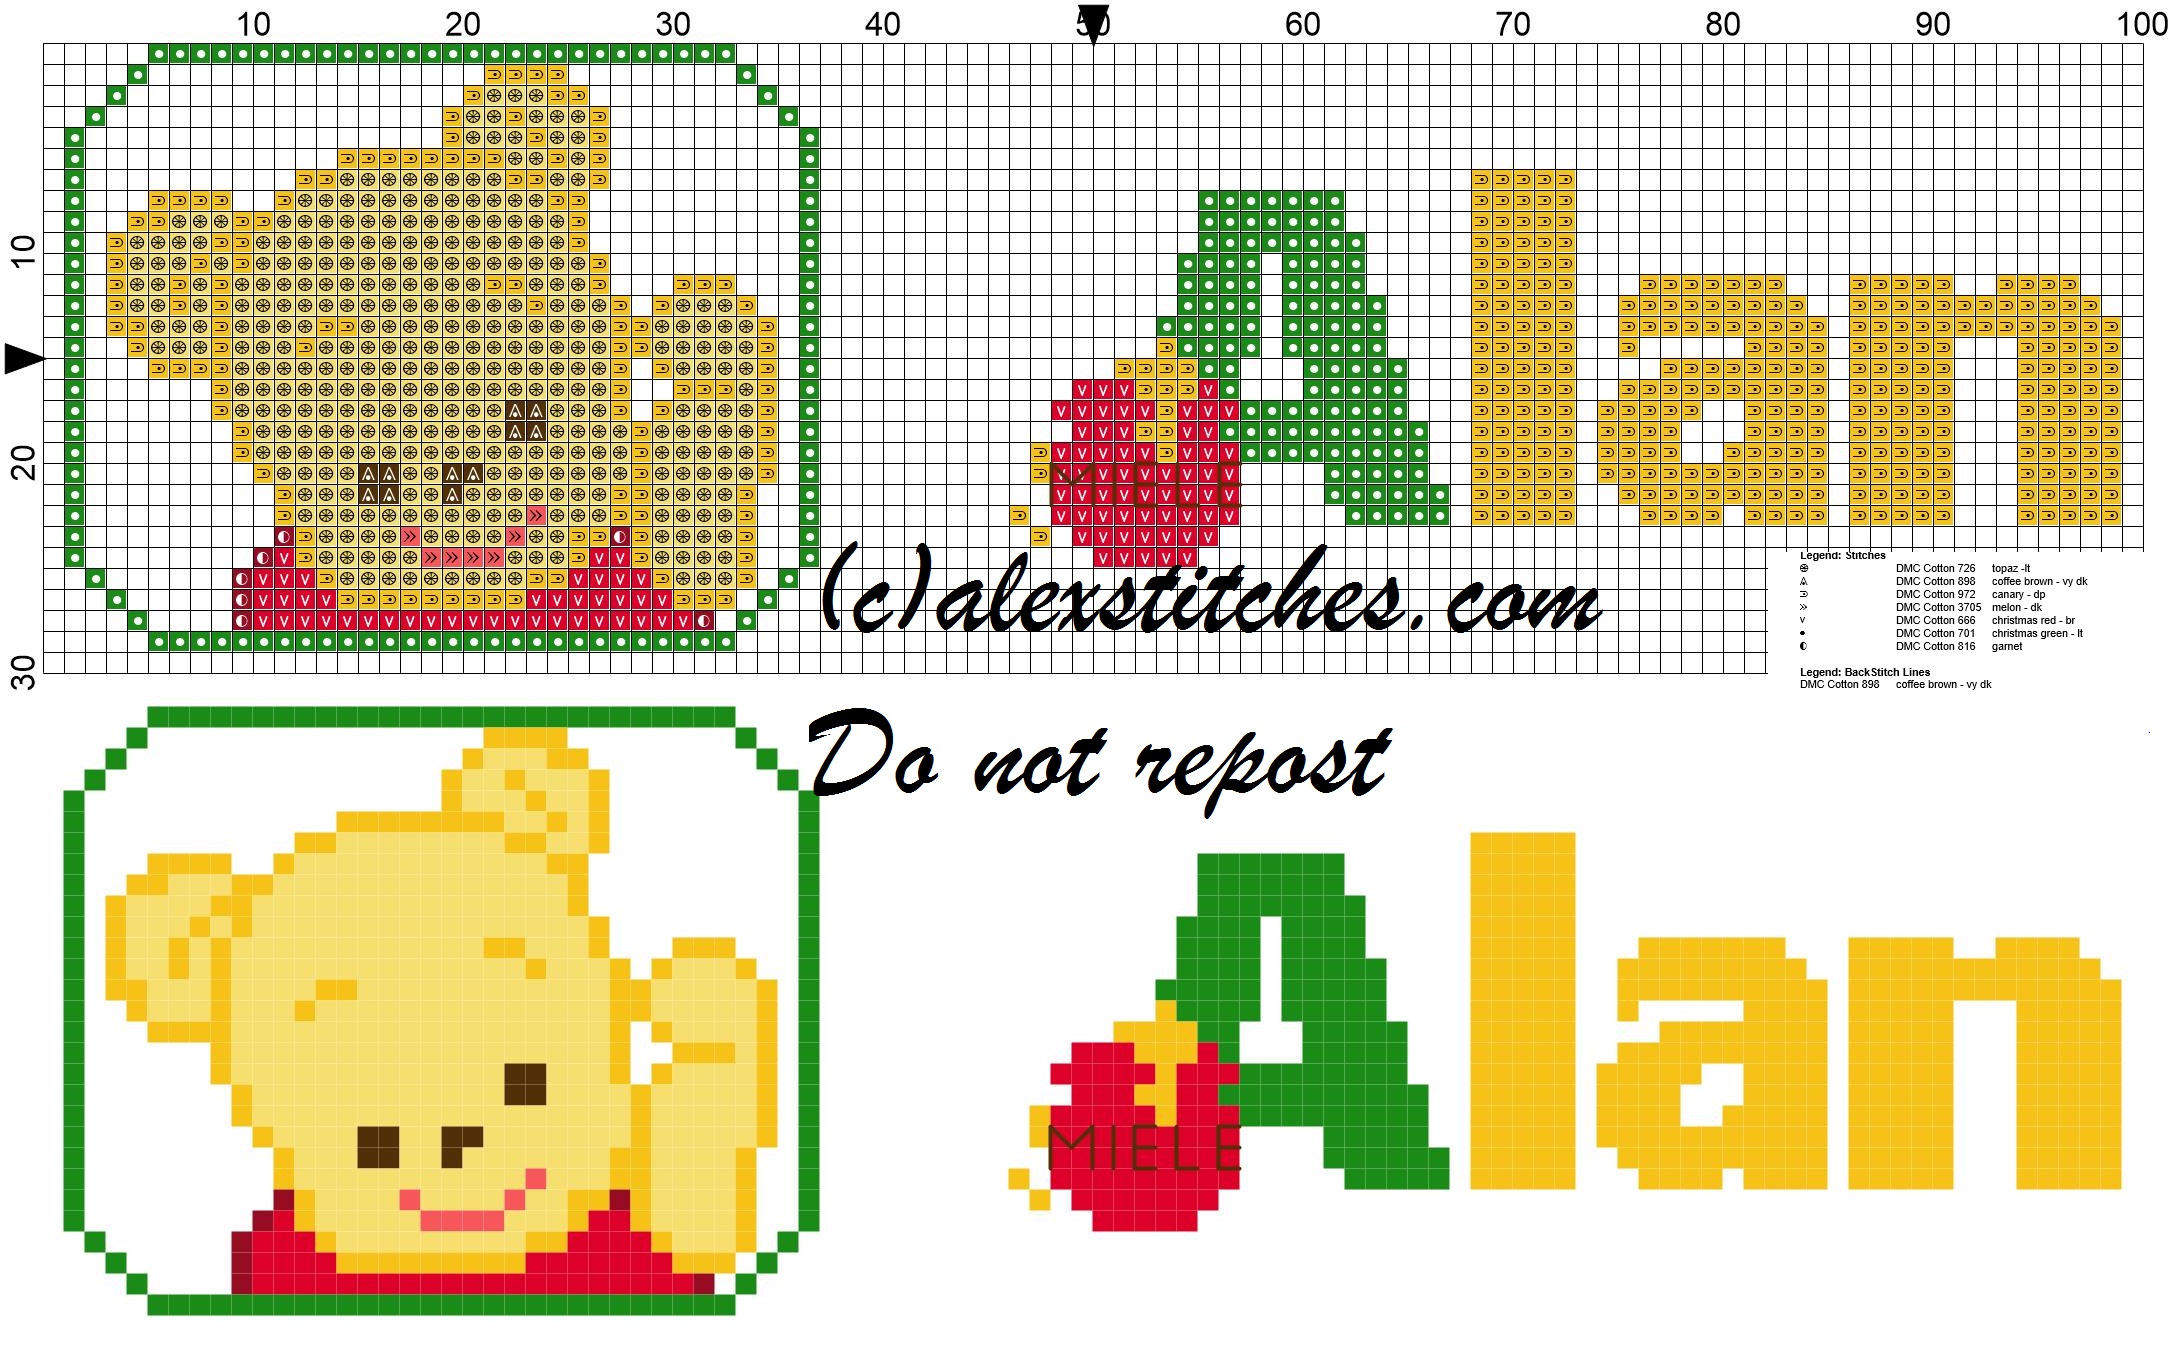 Alan name with Baby winnie the pooh free cross stitches pattern